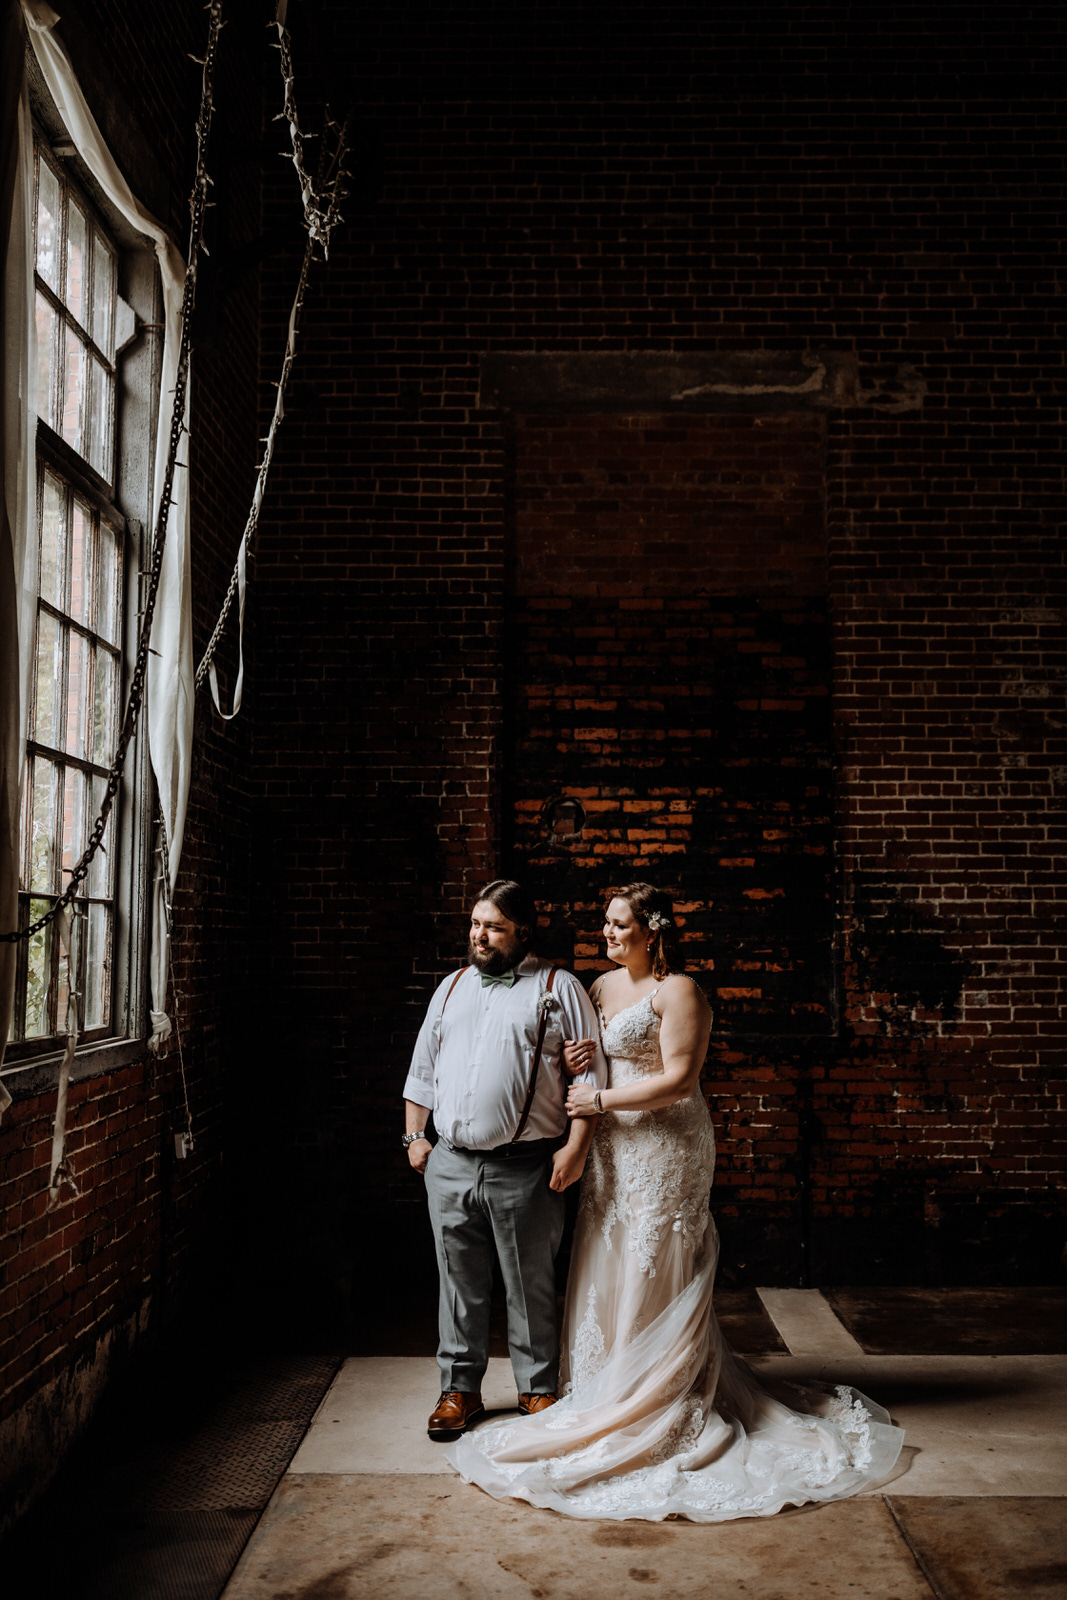 Bride & Groom Portrait in front of a brick wall with window light